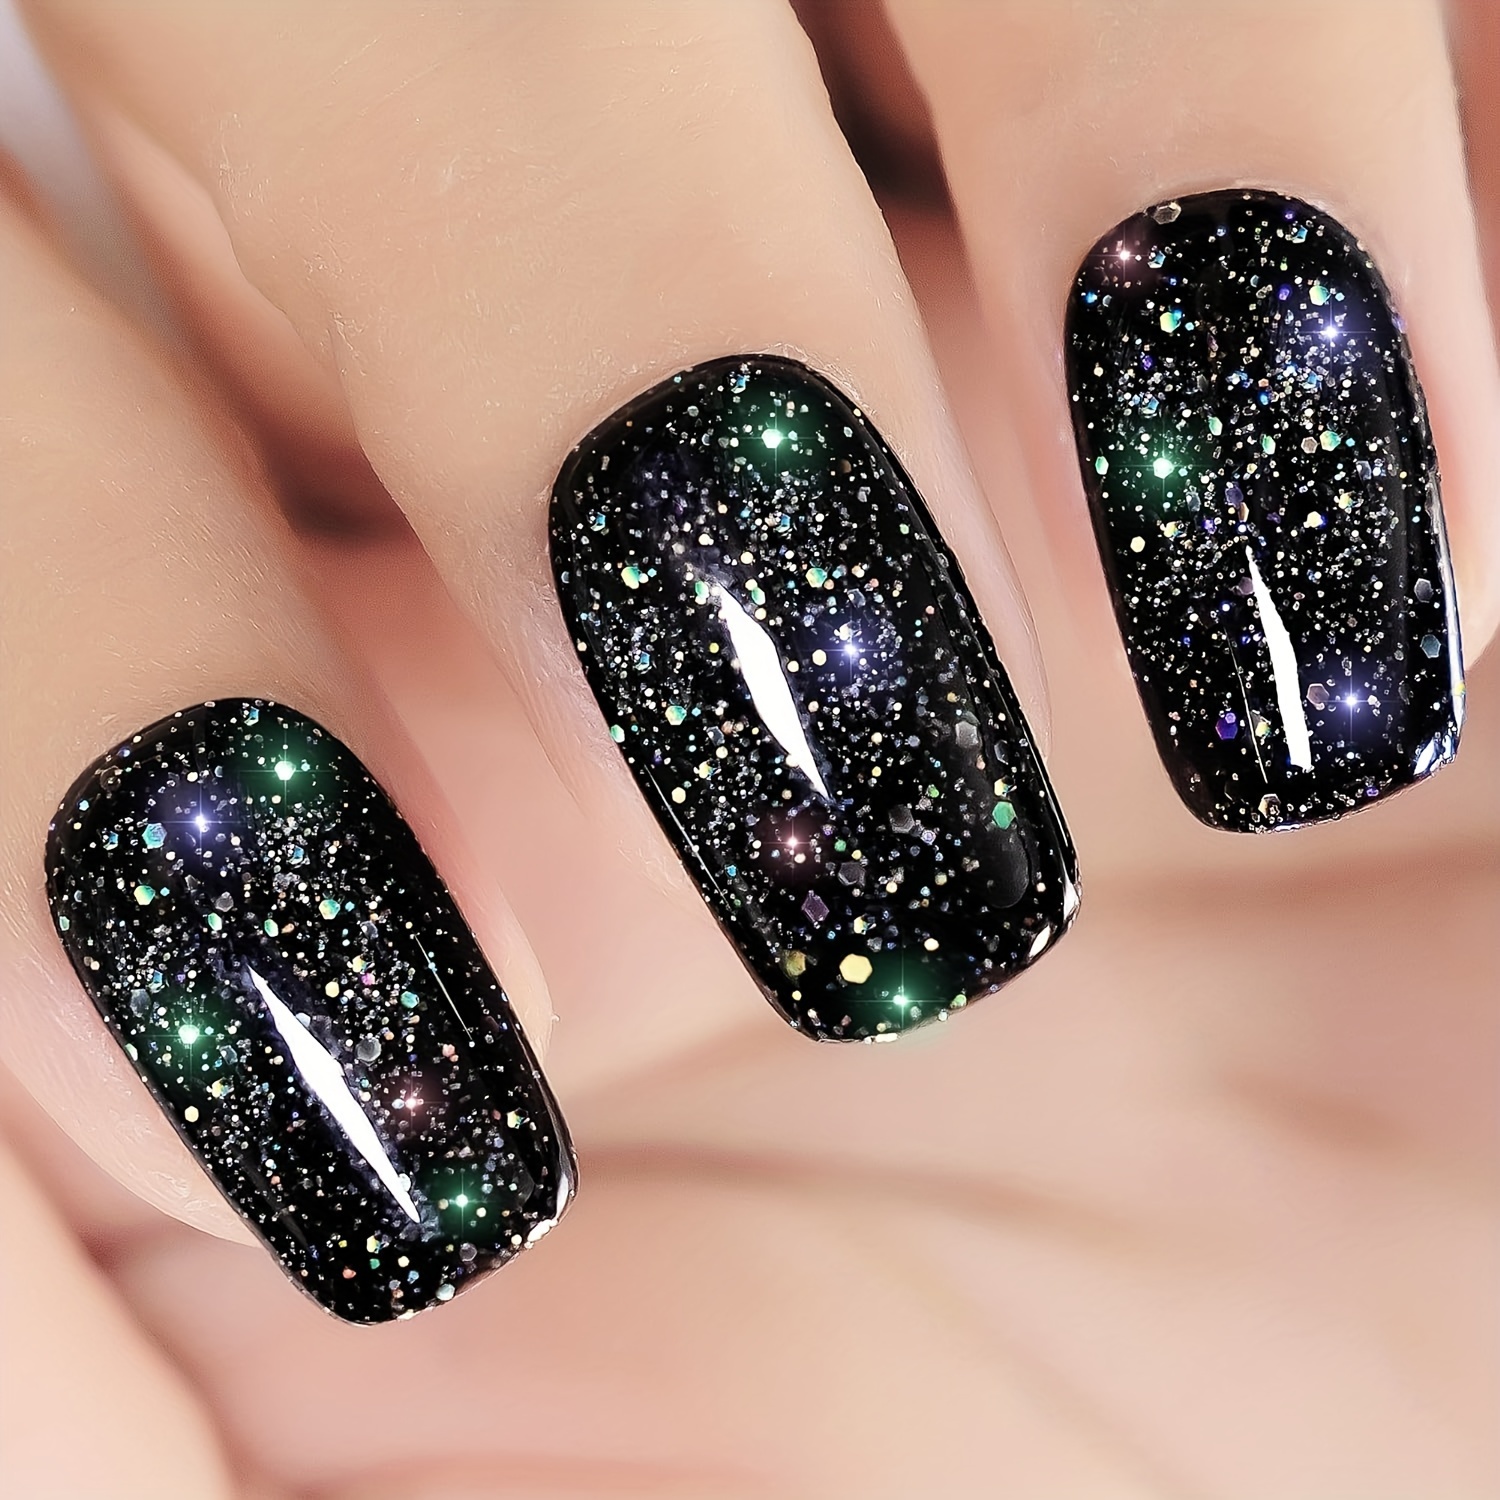 

24pcs/set Black Glitter Short Press On Nails, Shimmer Fake Nails Square Galaxy Glue On Nails False Nails Stick On Nails In 12 Sizes, Jelly Glue And Nail File Included